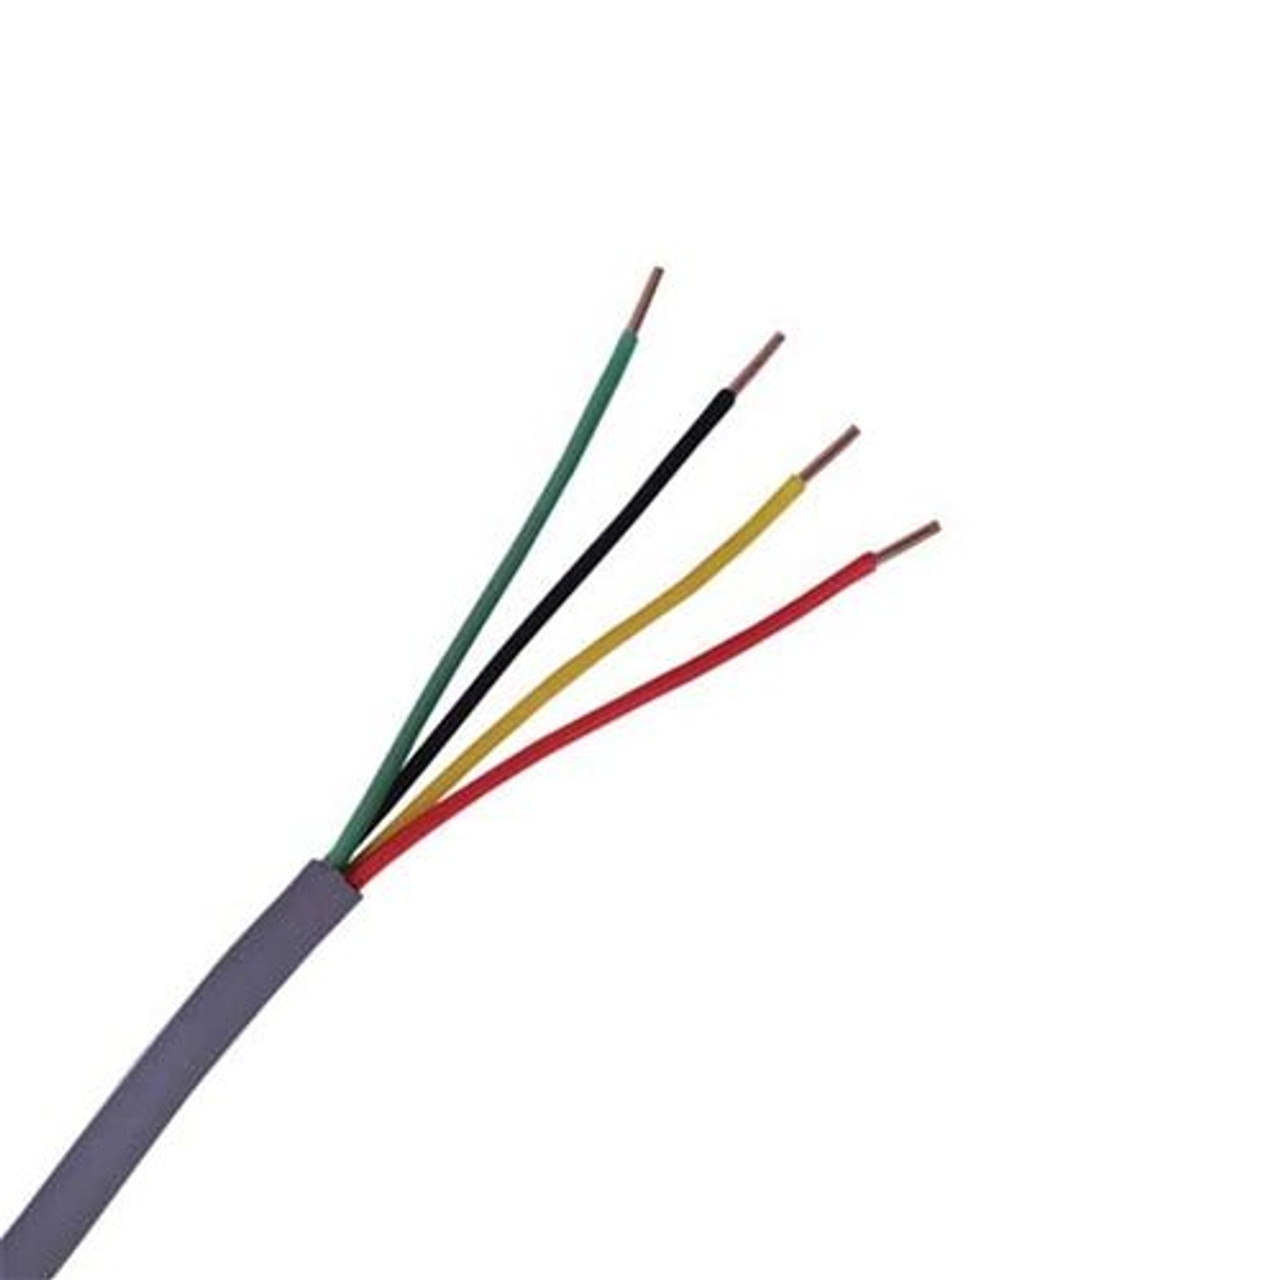 Steren 300-734 1000' FT 22 AWG 4 Conductor Wire Gray Solid Copper PVC Jacket Cable Bulk Power Control Signal Security Wire UL Residential and Commercial Thermostat 22-4, Part # 300734